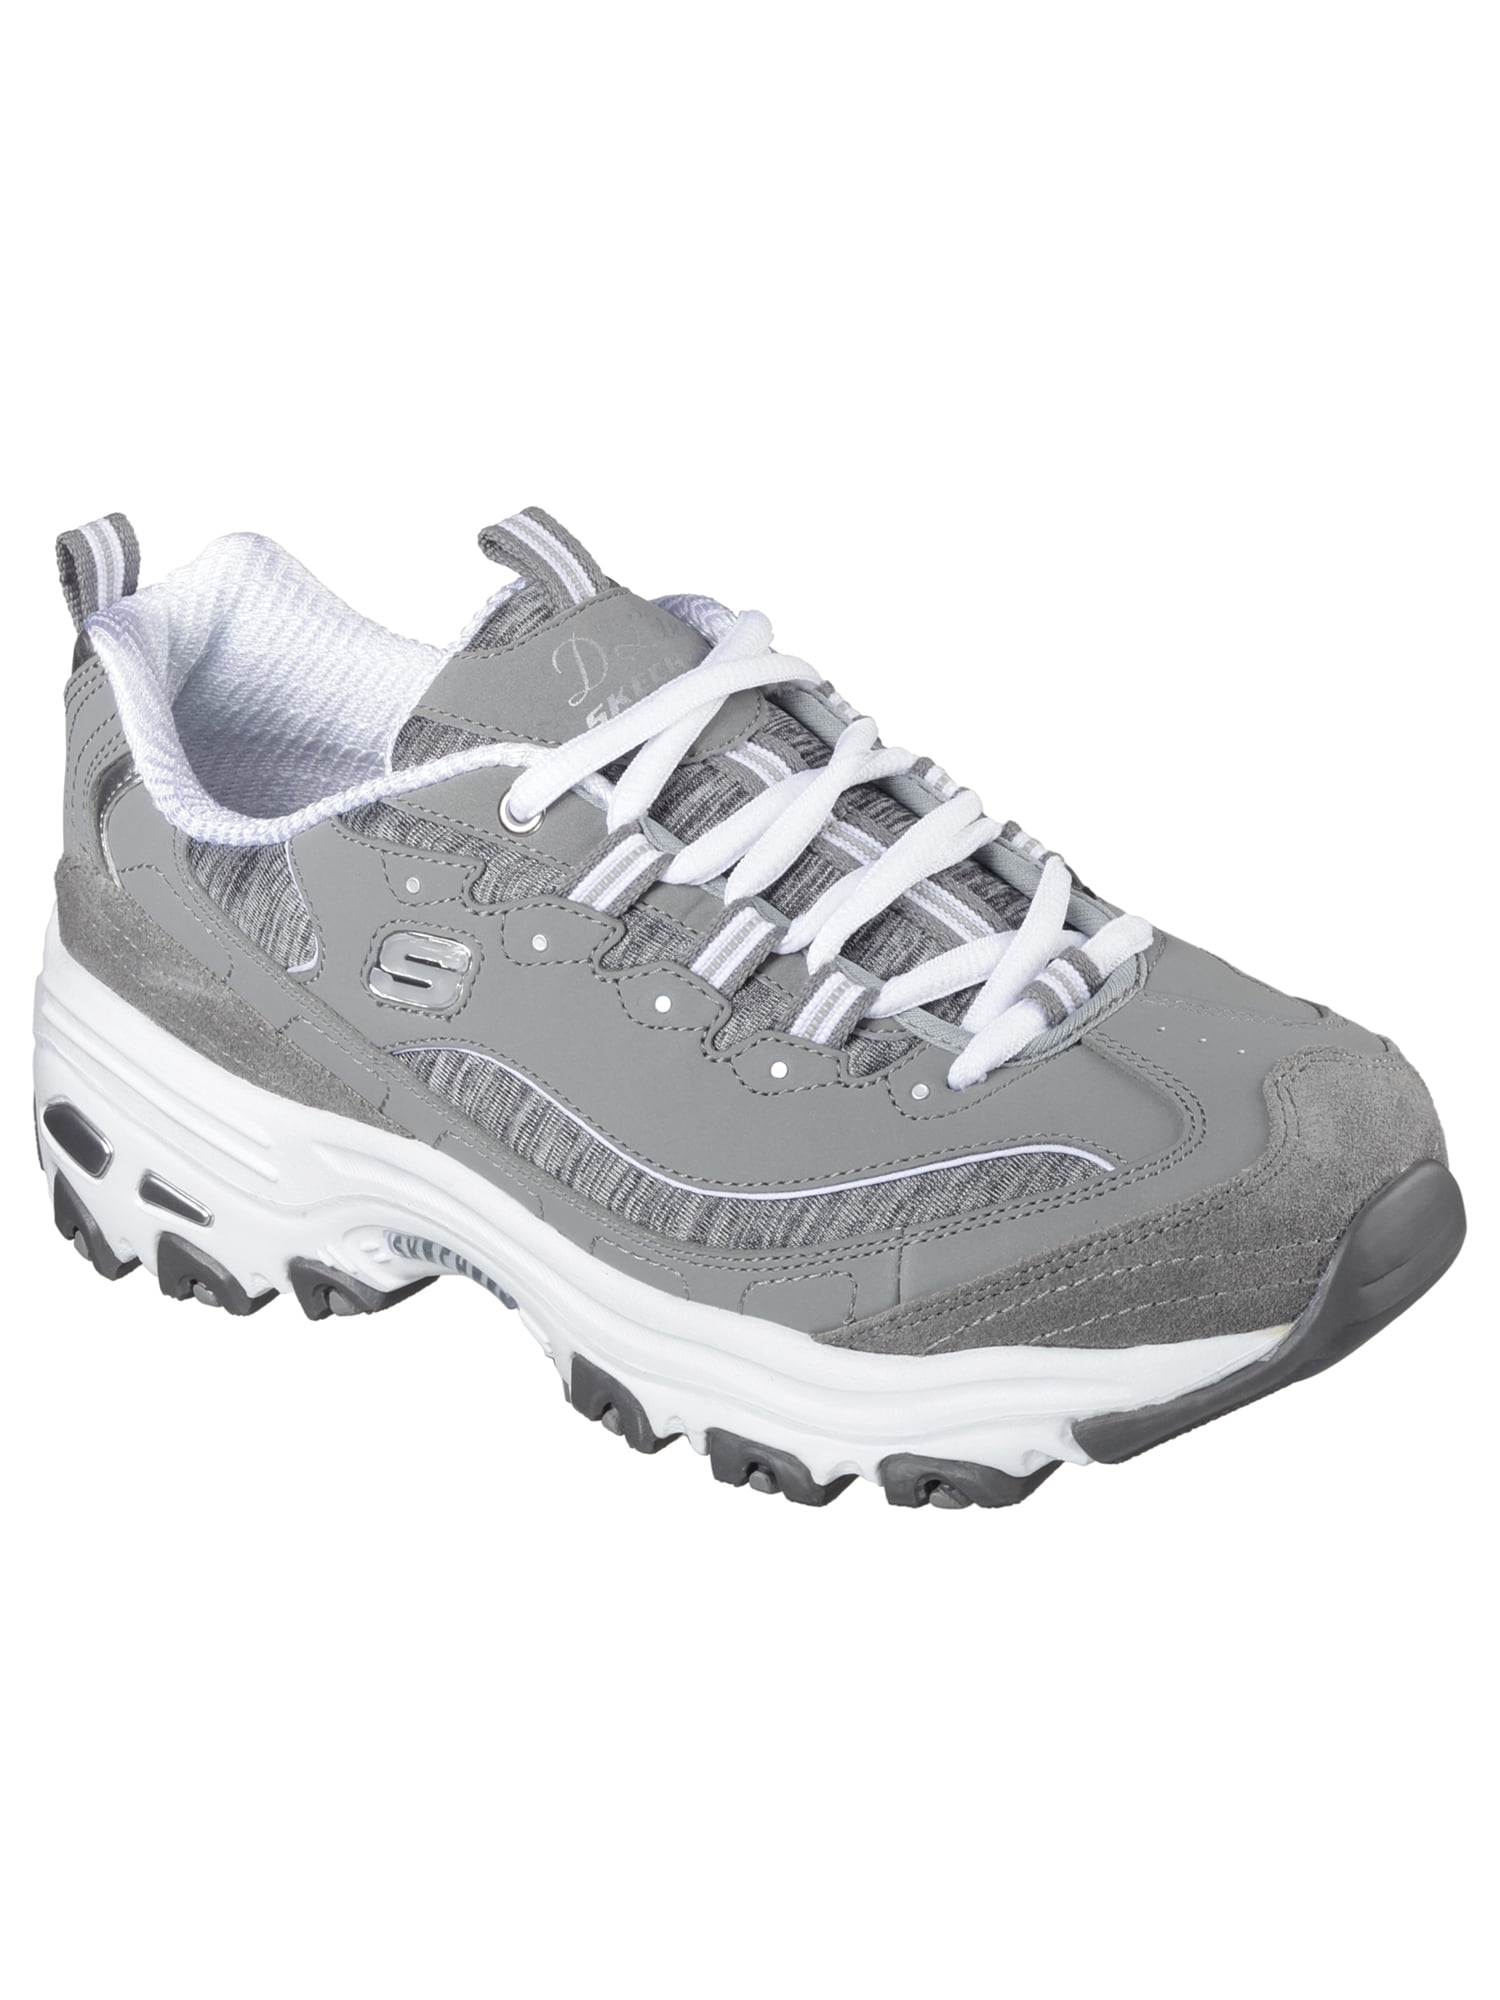 Women's Sport Time Lace-up Athletic Sneaker, Wide Width Available - Walmart.com